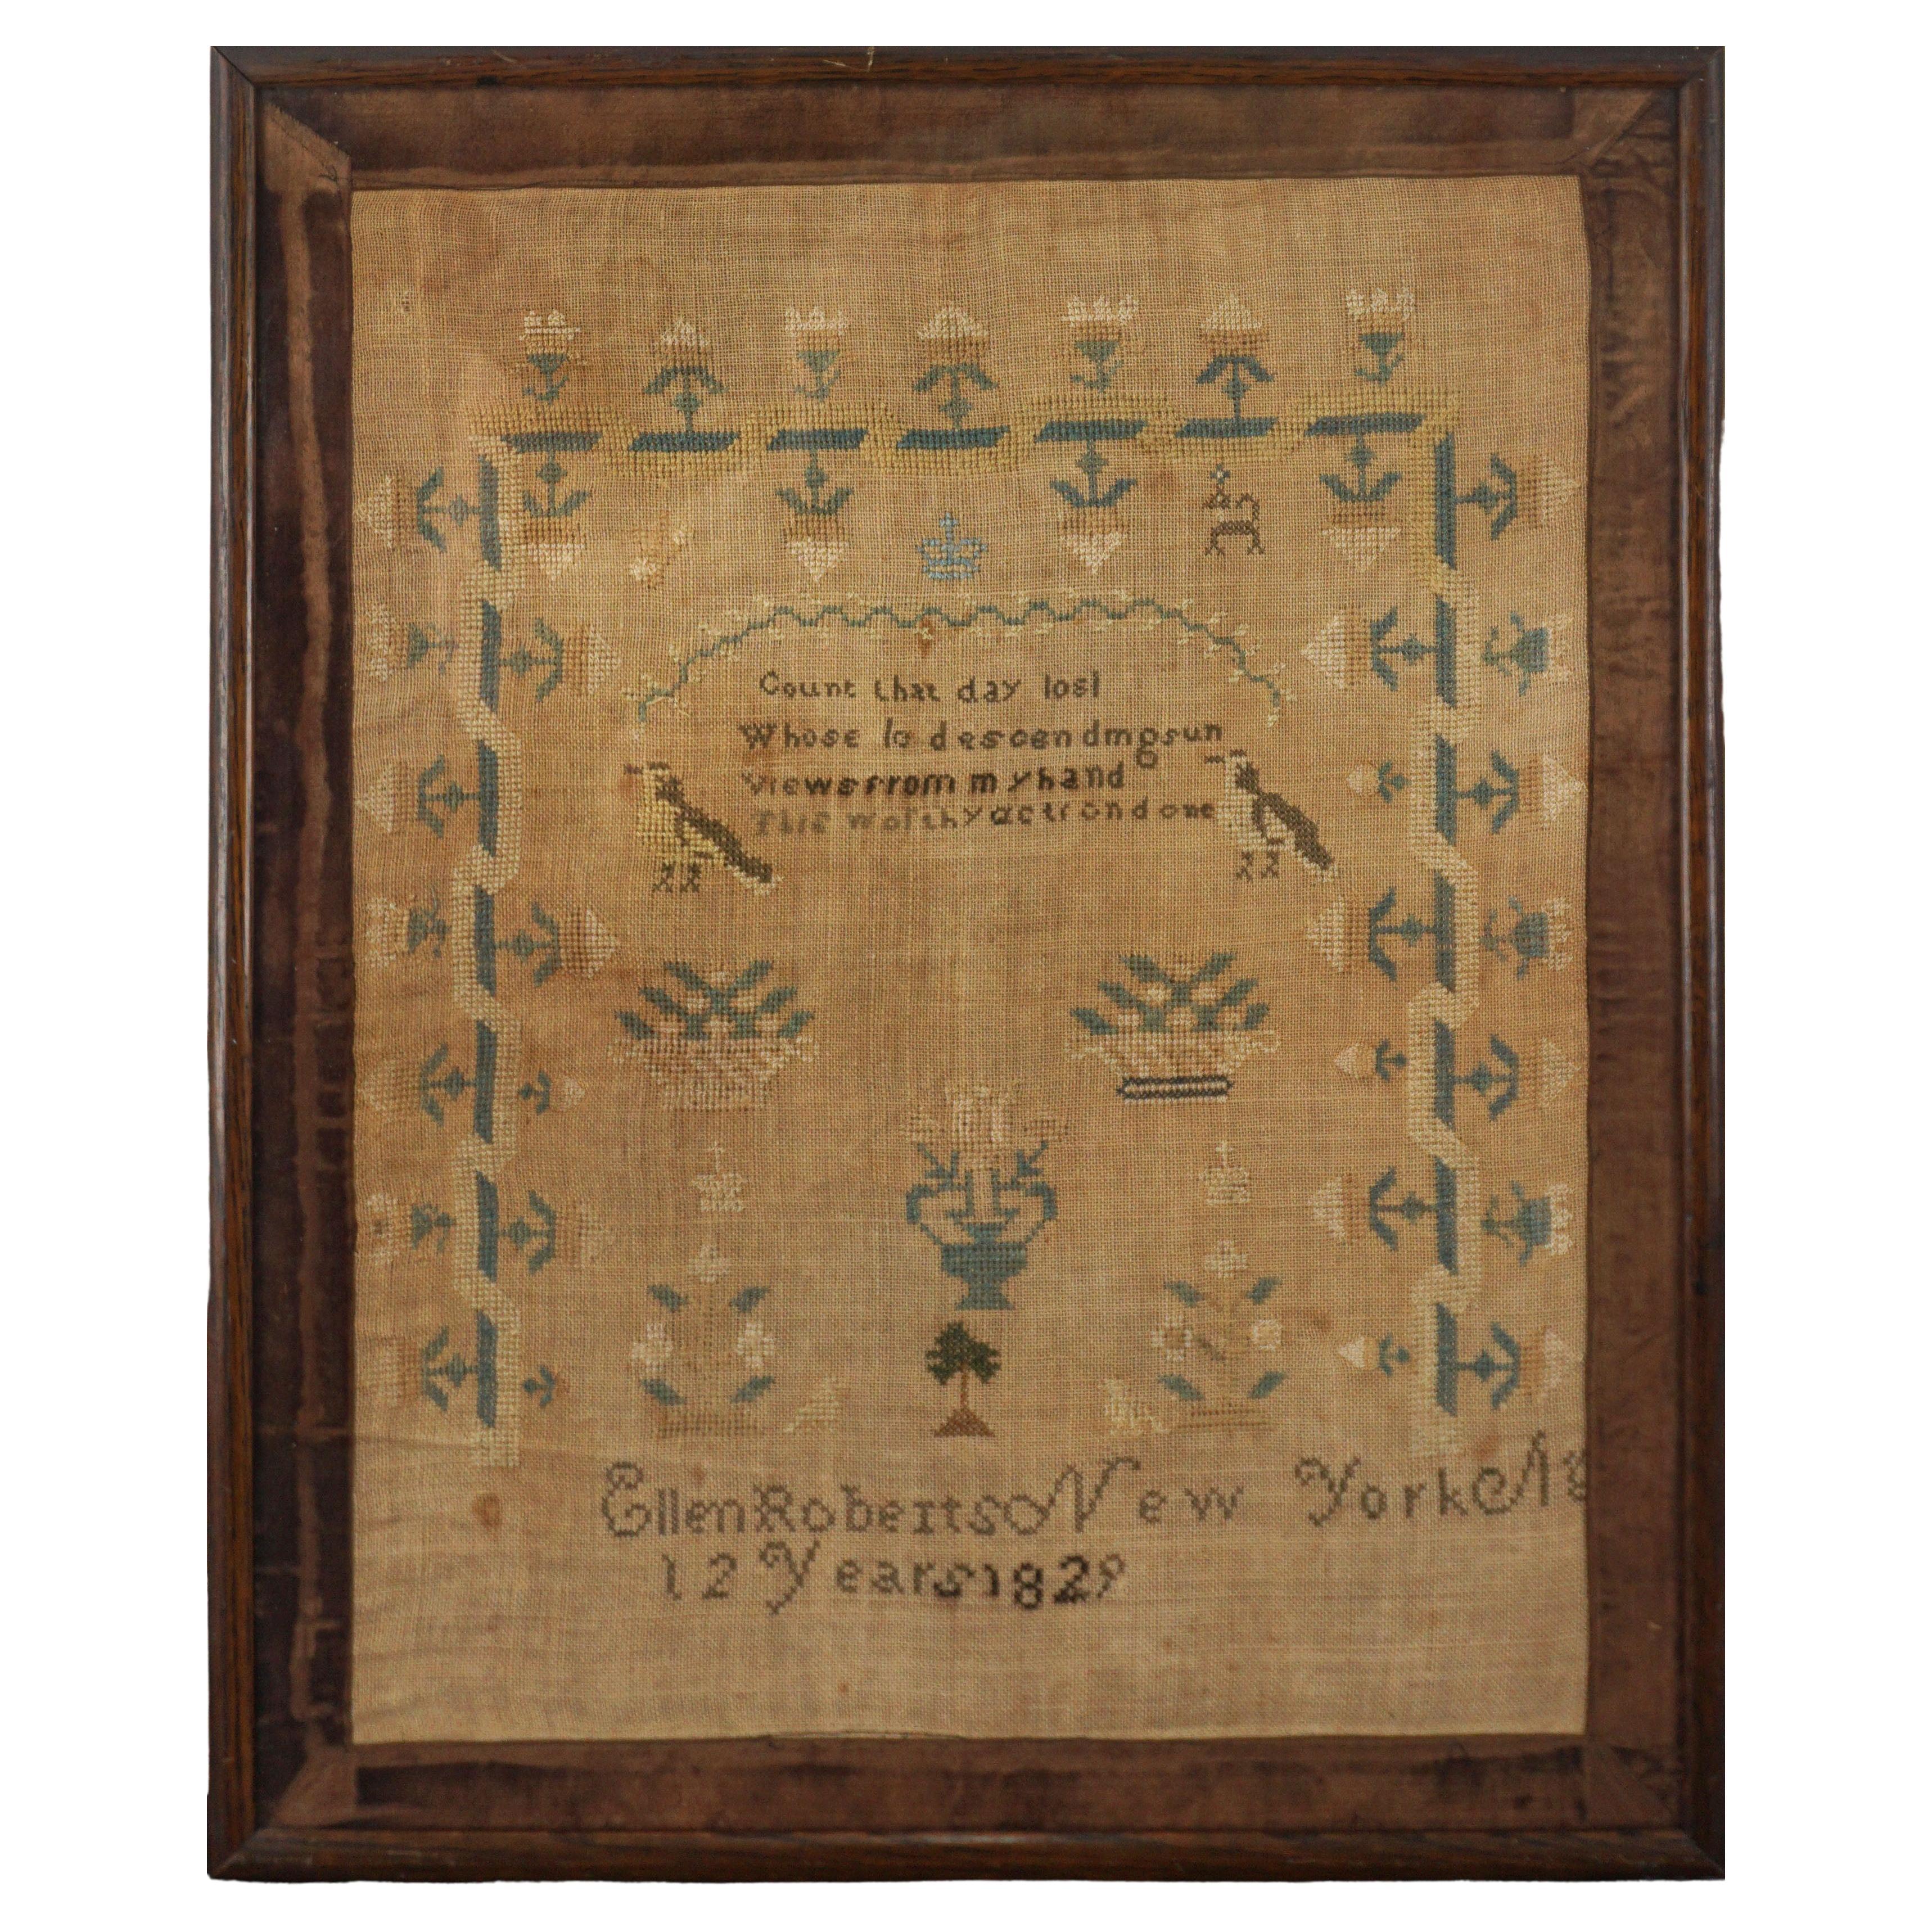 1829 Needlepoint Pictorial Sampler of Flowers and Quote by 12-year old Girl.